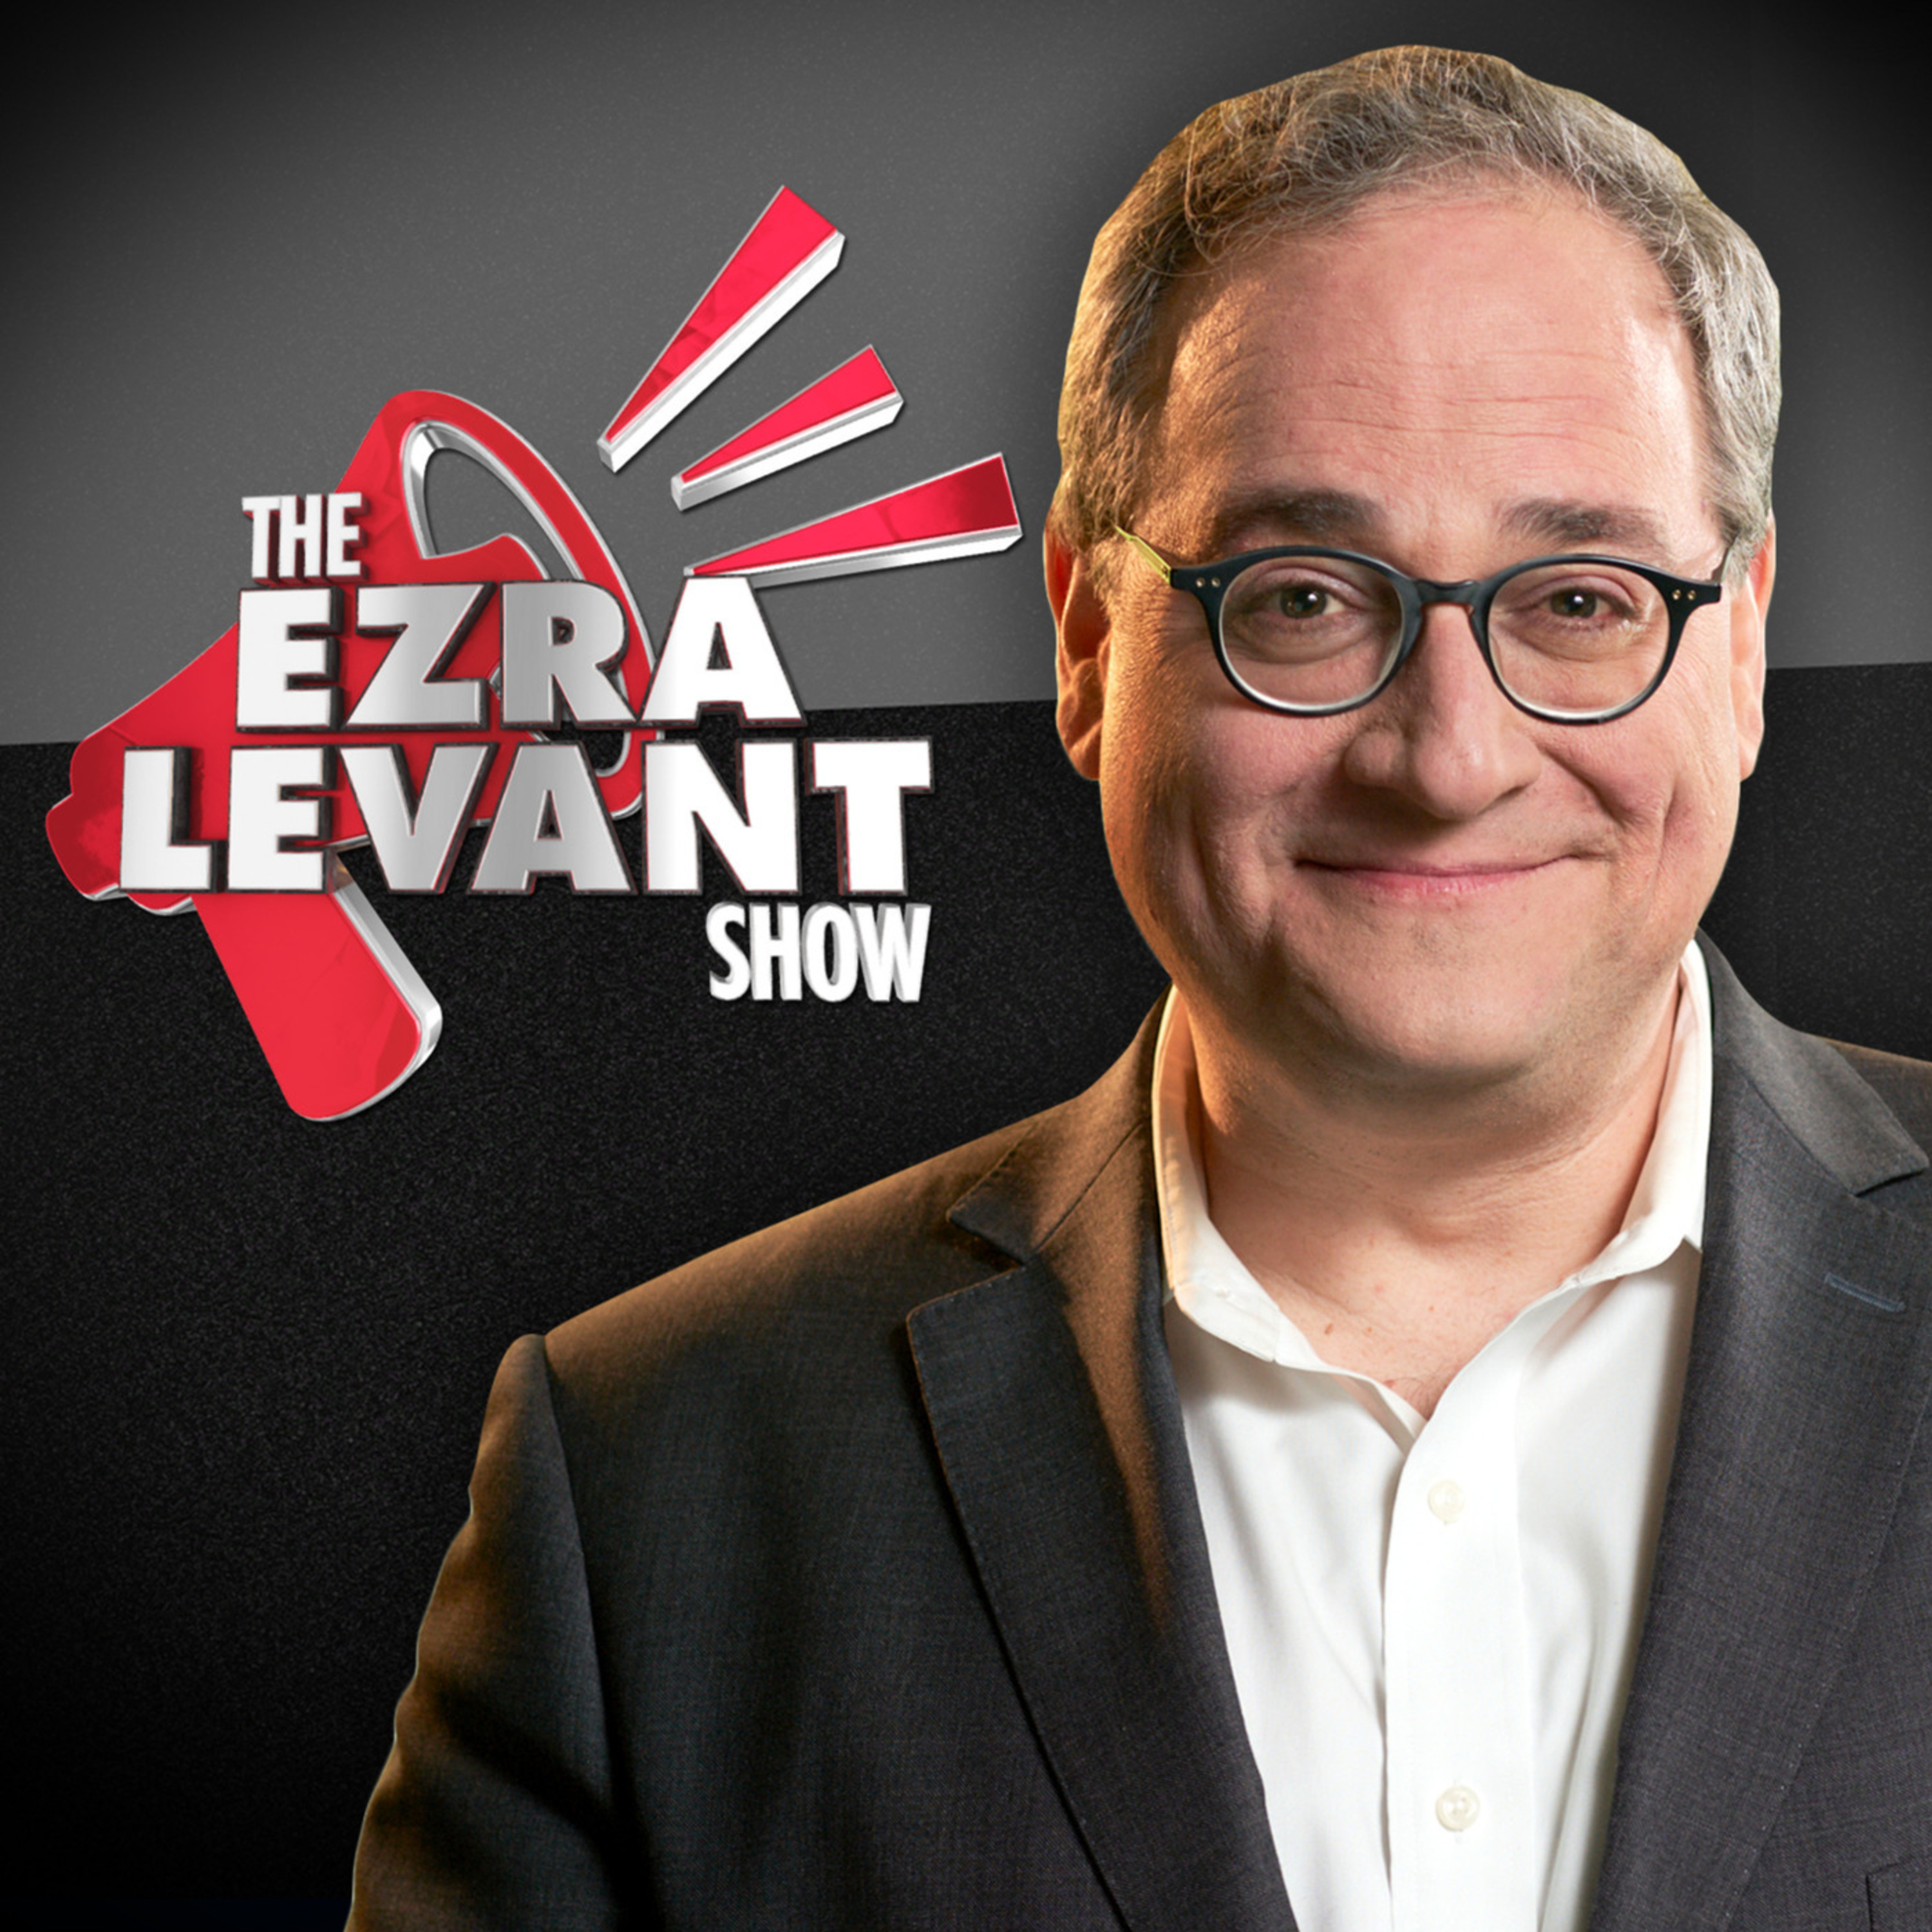 EZRA LEVANT | Let me show you how Trudeau’s office plants an identical story in the entire regime media